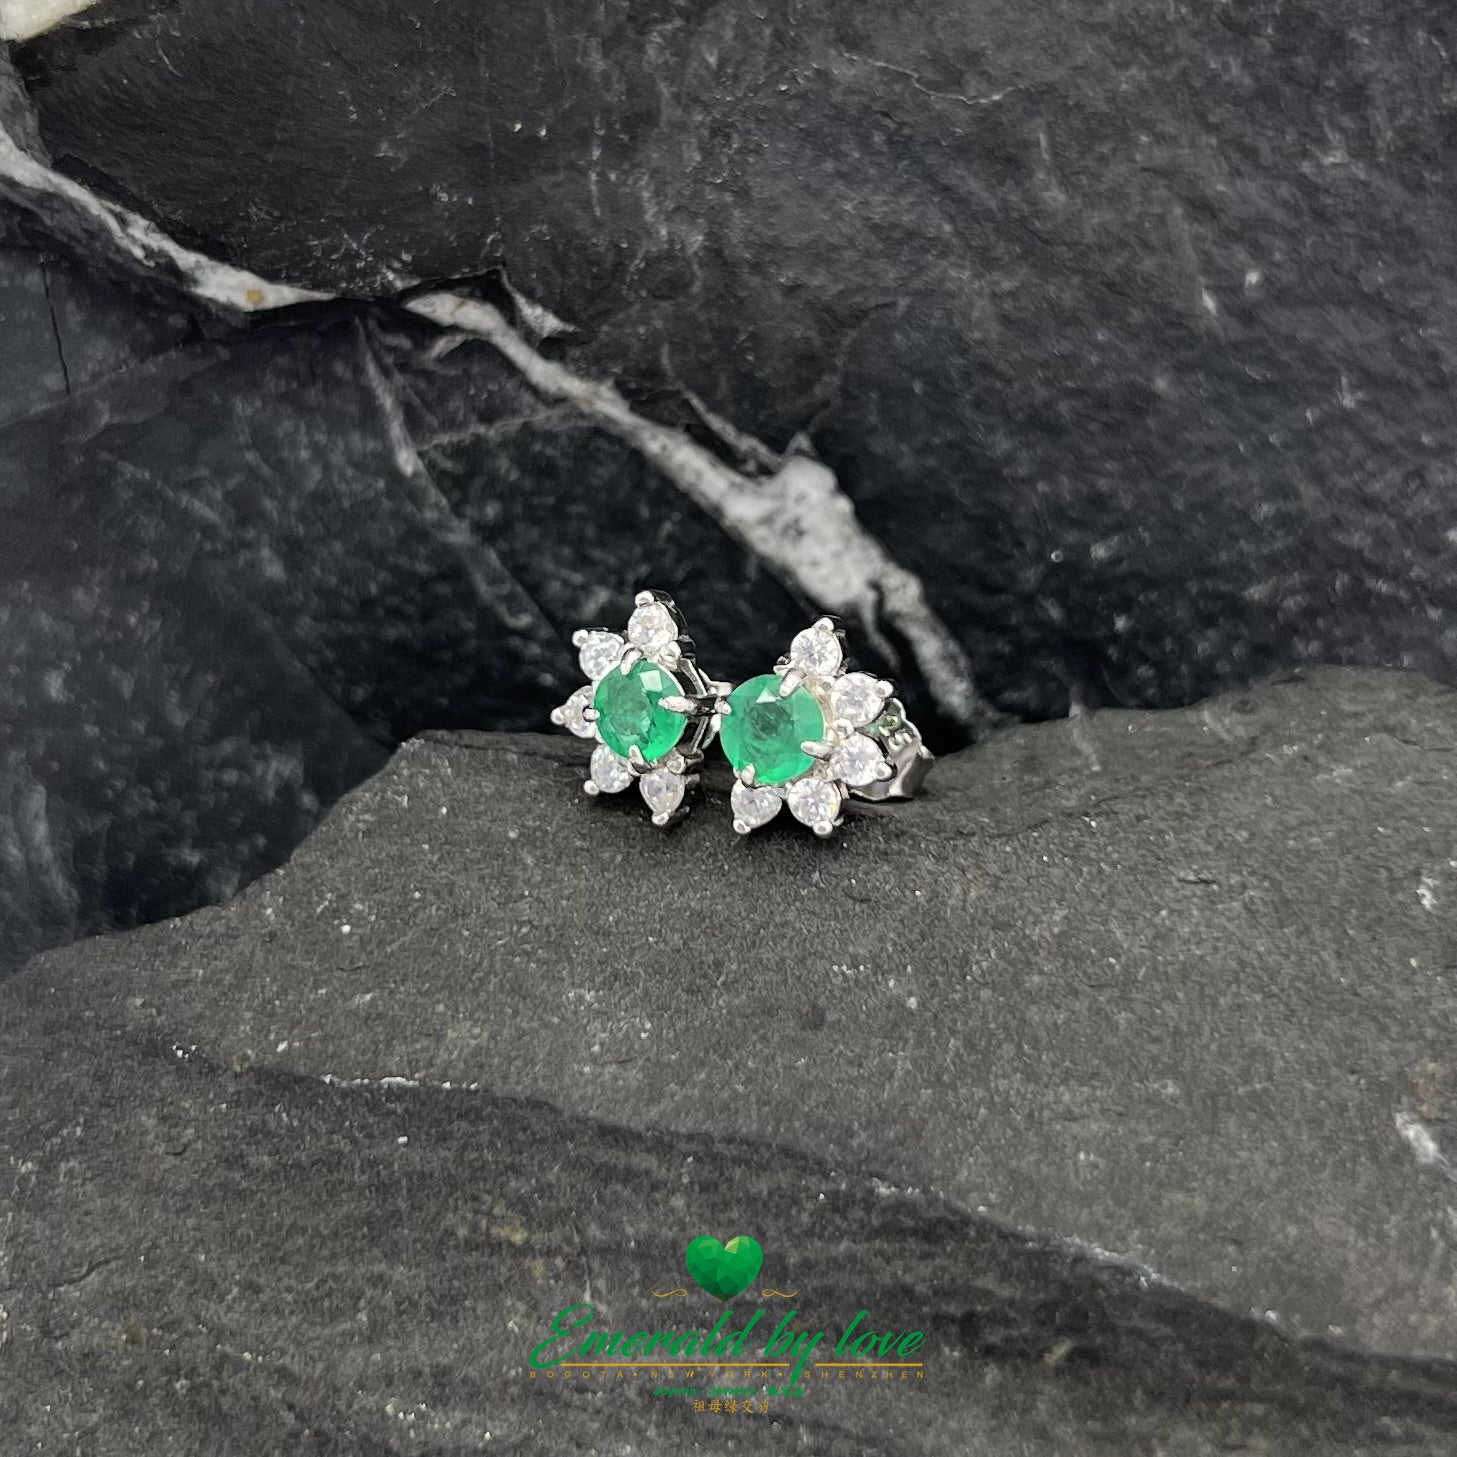 Beautiful Half-Flower Sterling Silver Earrings with Central Round Emerald